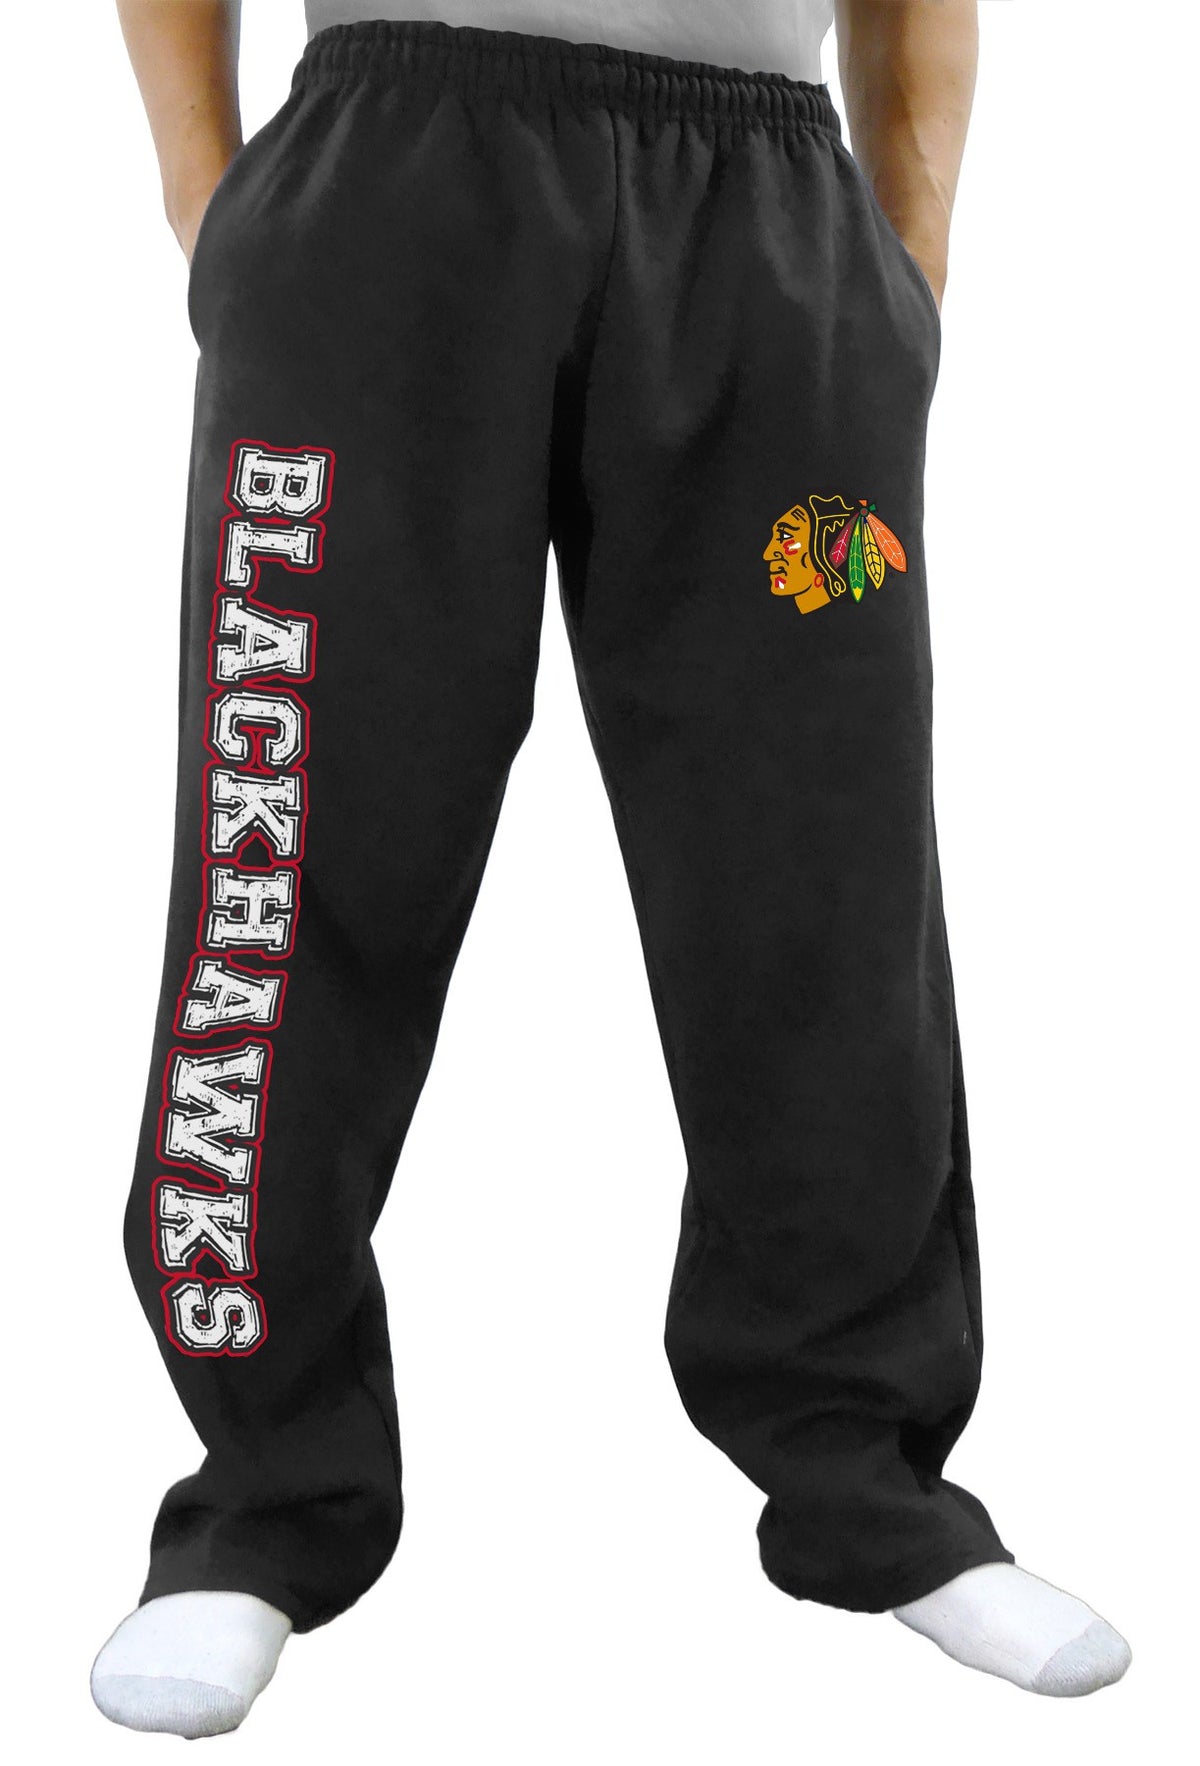 Chicago Blackhawks Officially NHL Licensed Track Pants